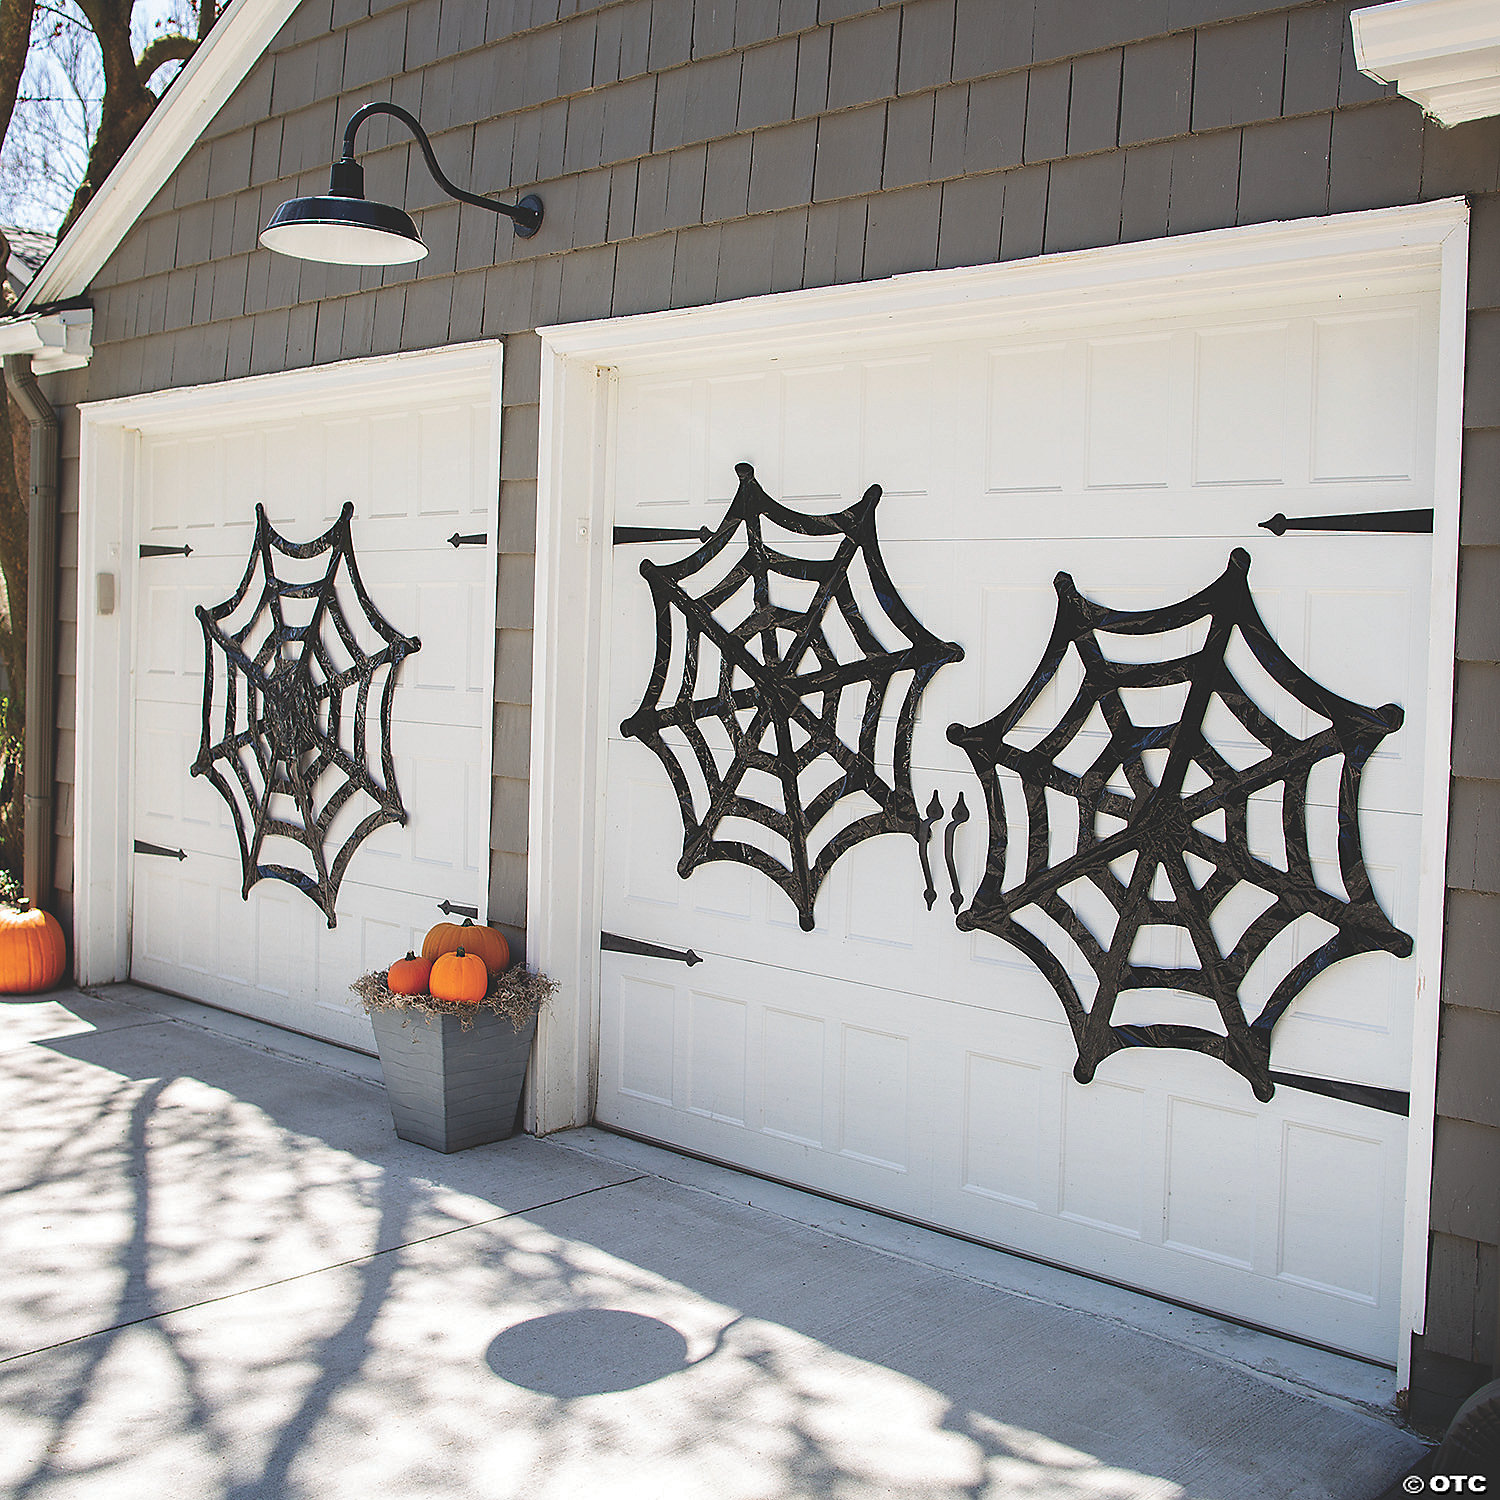 50ft Halloween BLACK Spider WEB Pennant Banner Bunting Party Decoration